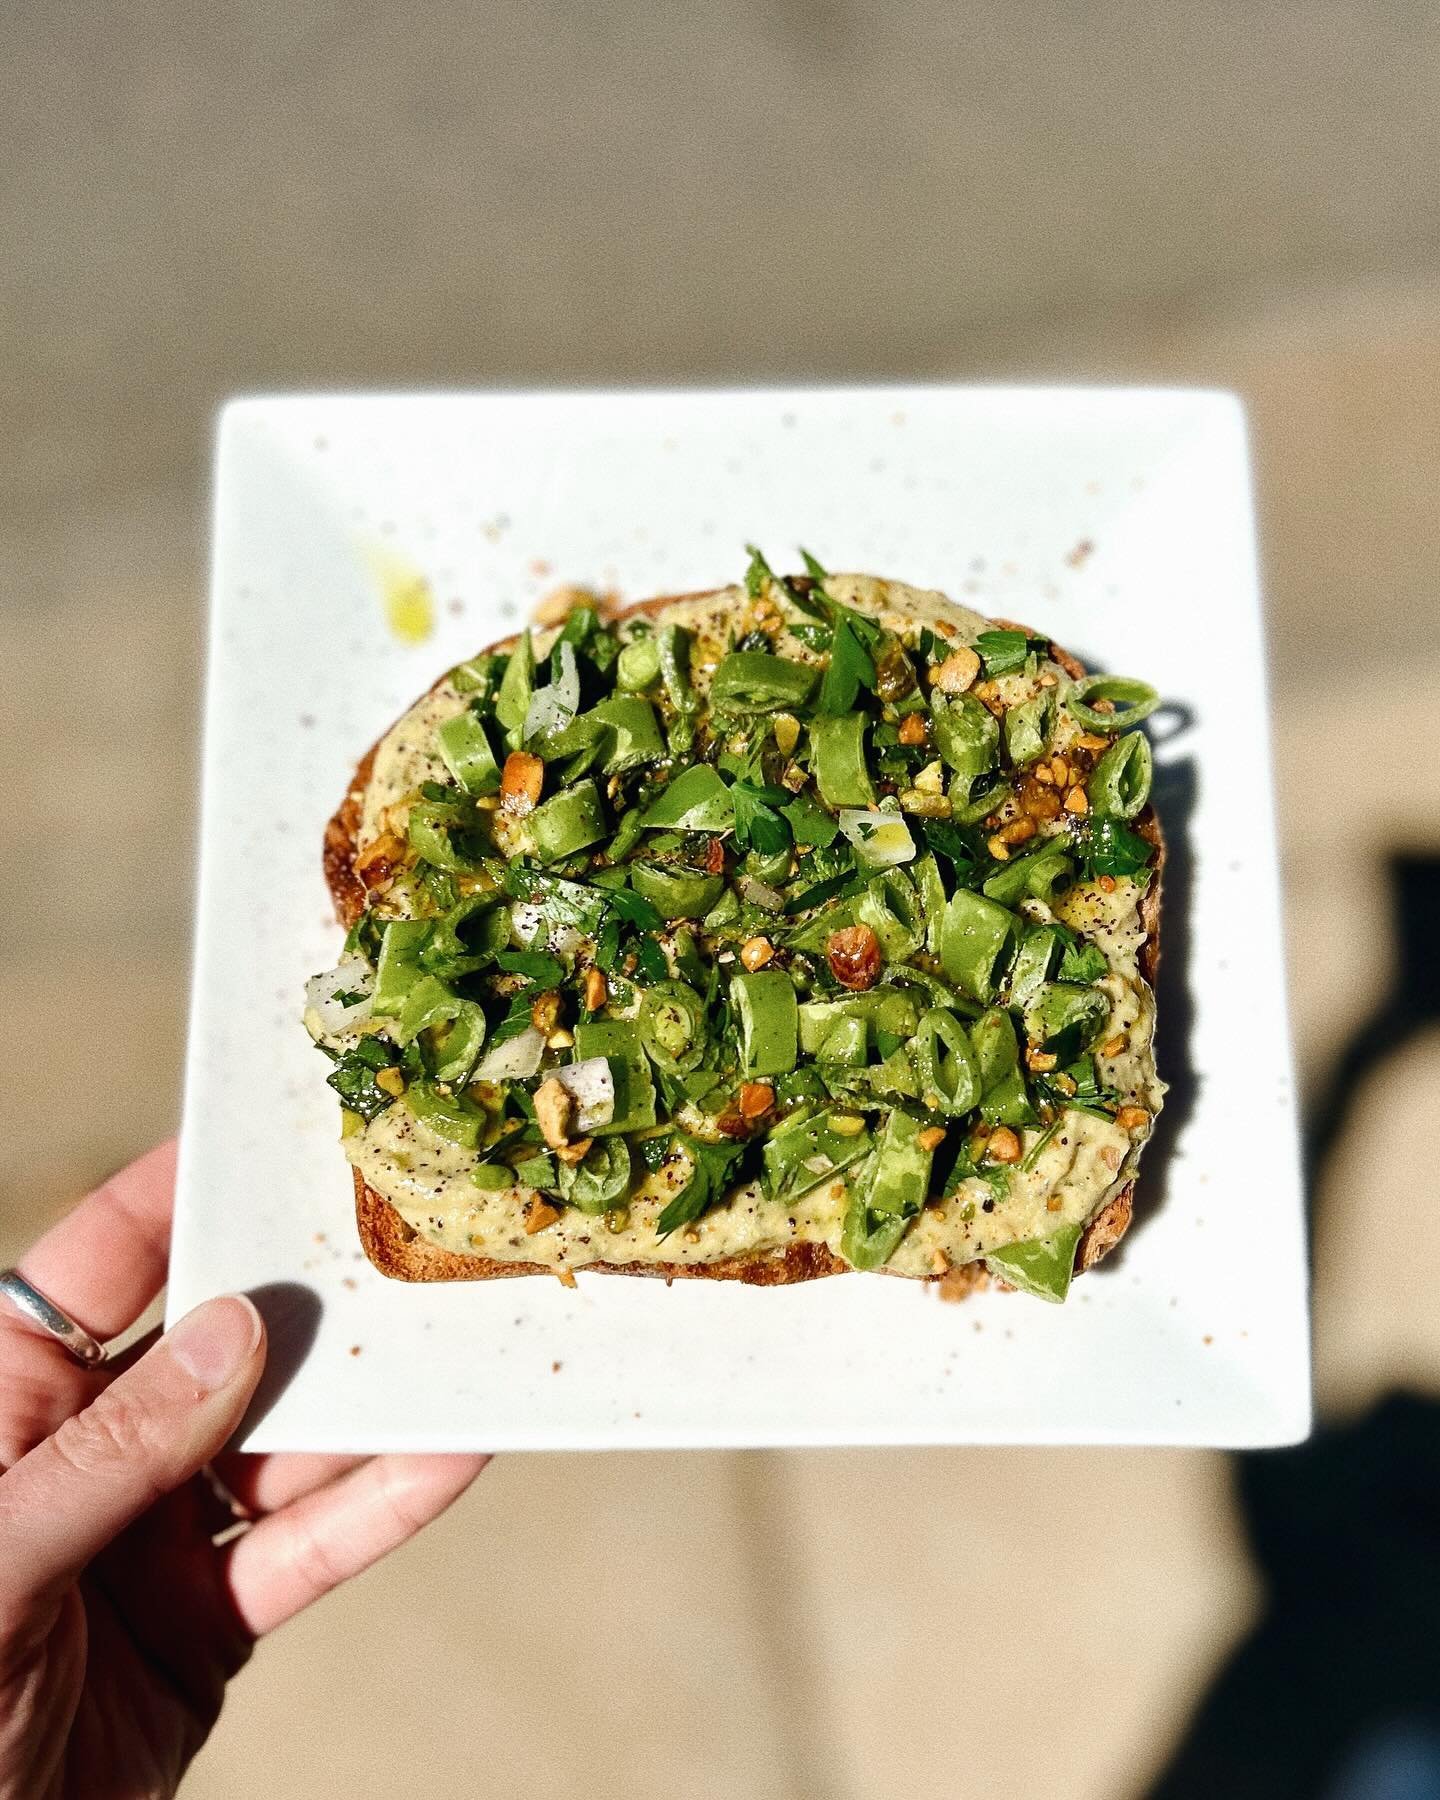 Have you tried the Very Verdant Victual yet? Our current toast special made by @houseflyvictuals is the perfect spring-y snack&hellip;zucchini baba ganoush, snap pea + herb salad, and an herby infused oil 🤩 Getcha some &lsquo;till the end of the mon